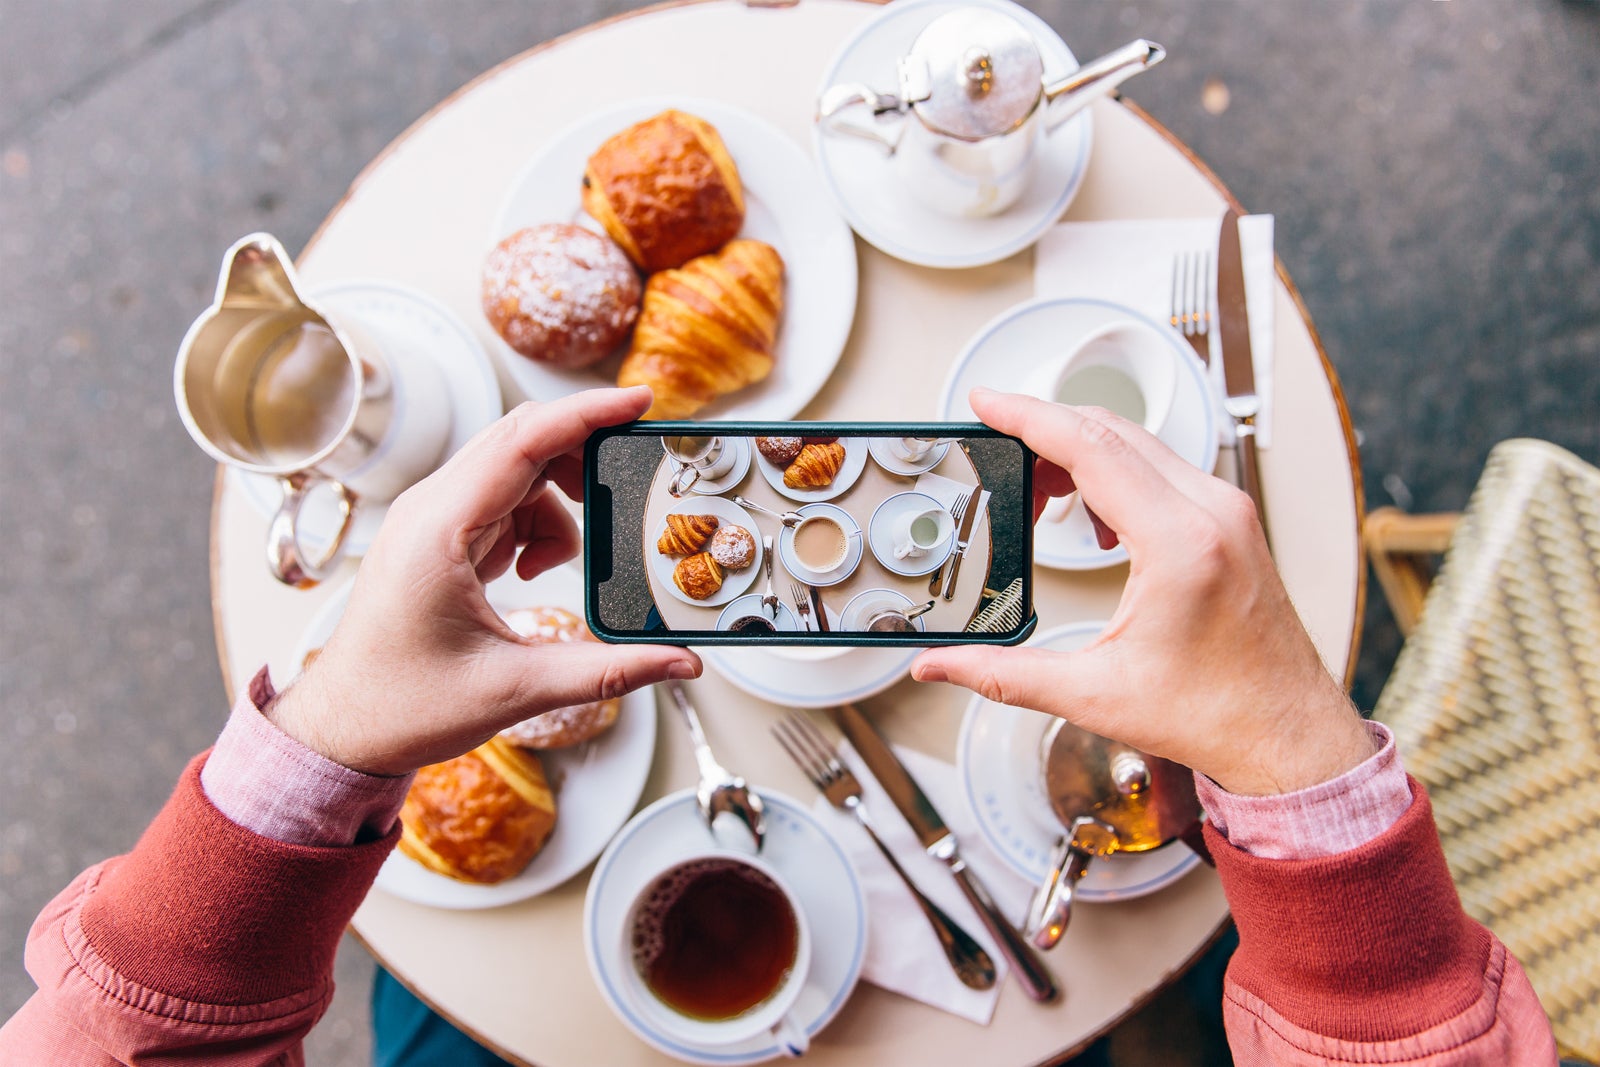 Young man photographing French breakfast with croissants on the table in sidewalk cafe with smartphone, Paris, France